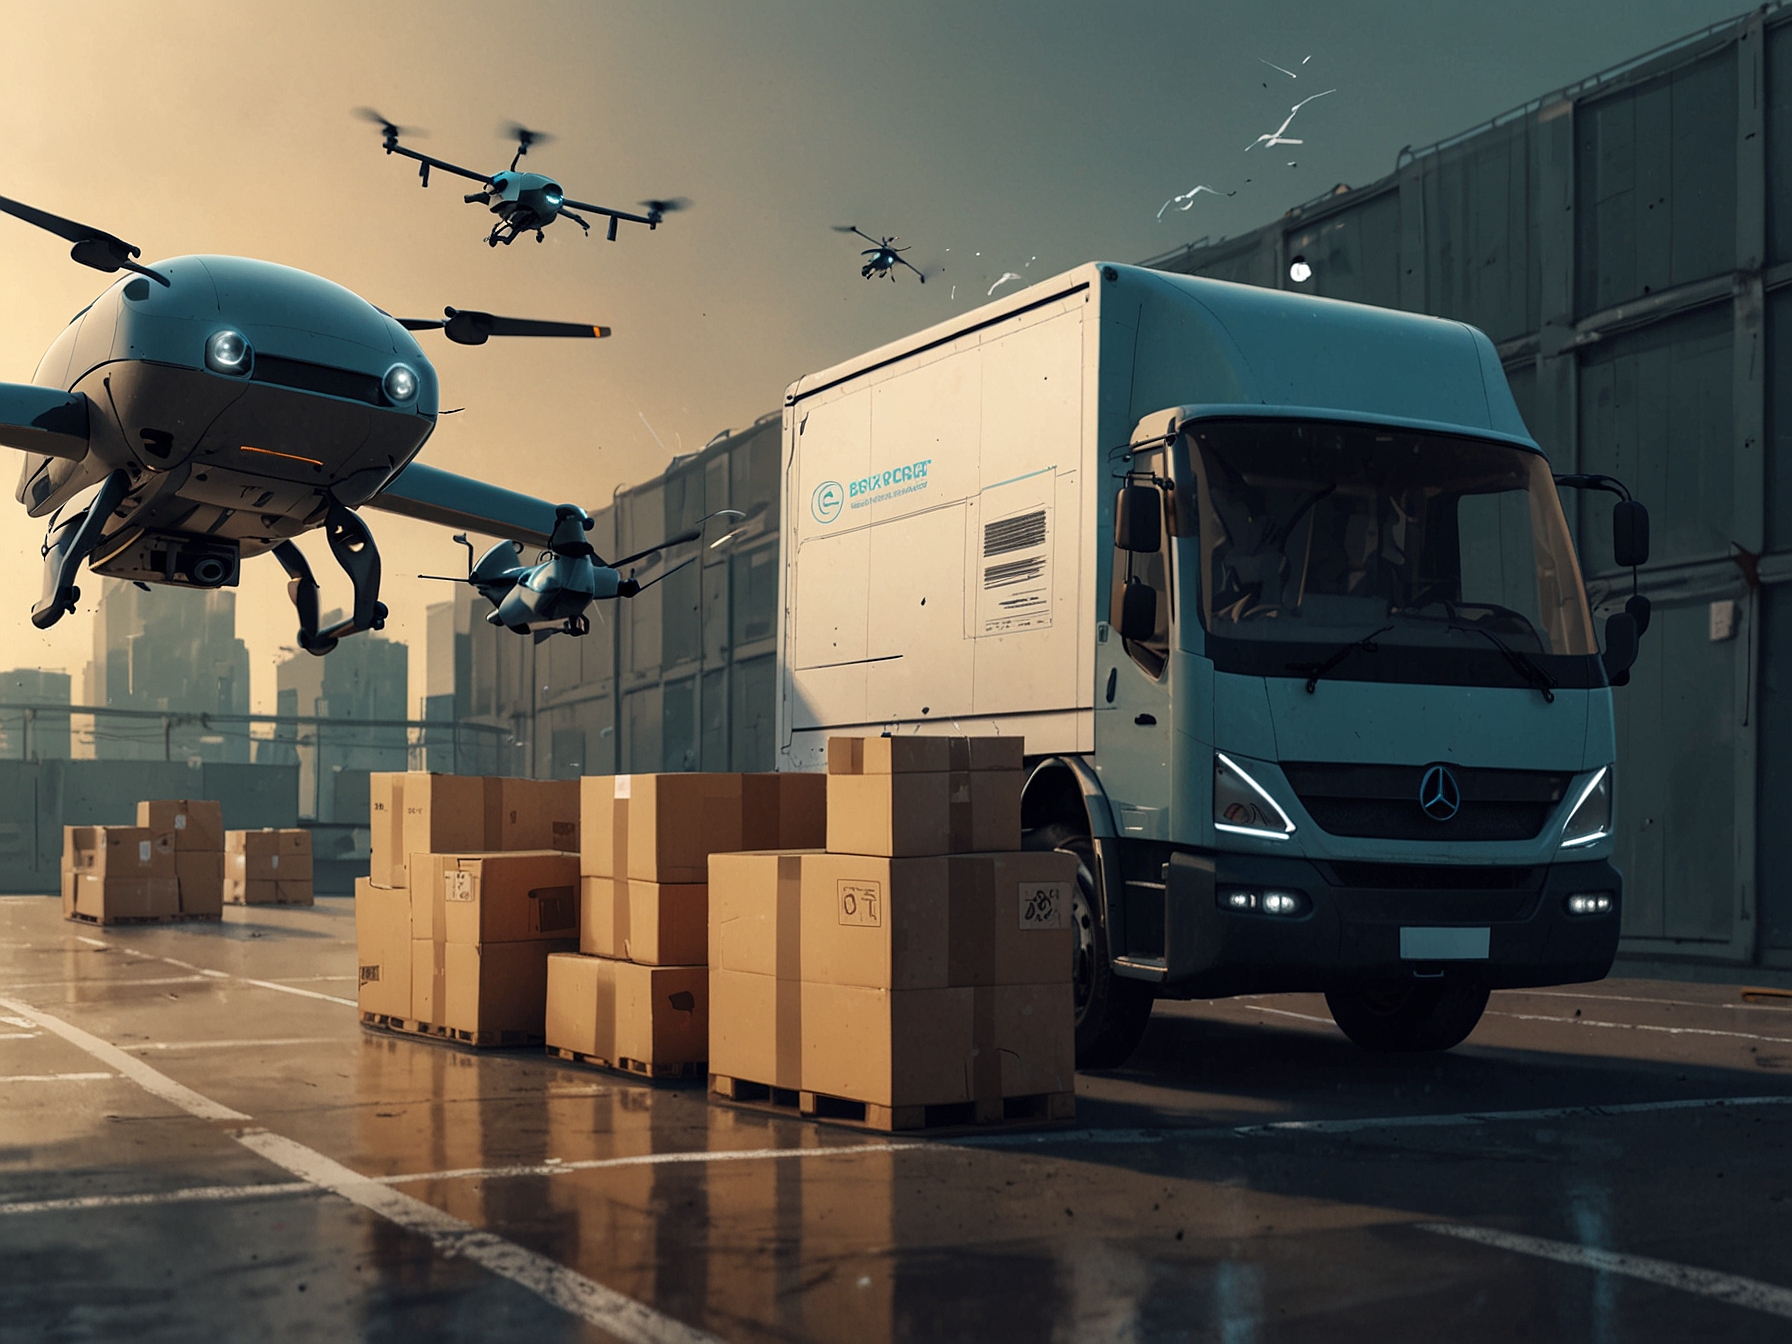 A depiction of autonomous delivery vehicles and drones operating in a modern logistics environment, highlighting the adoption of AI-driven automation in the supply chain.